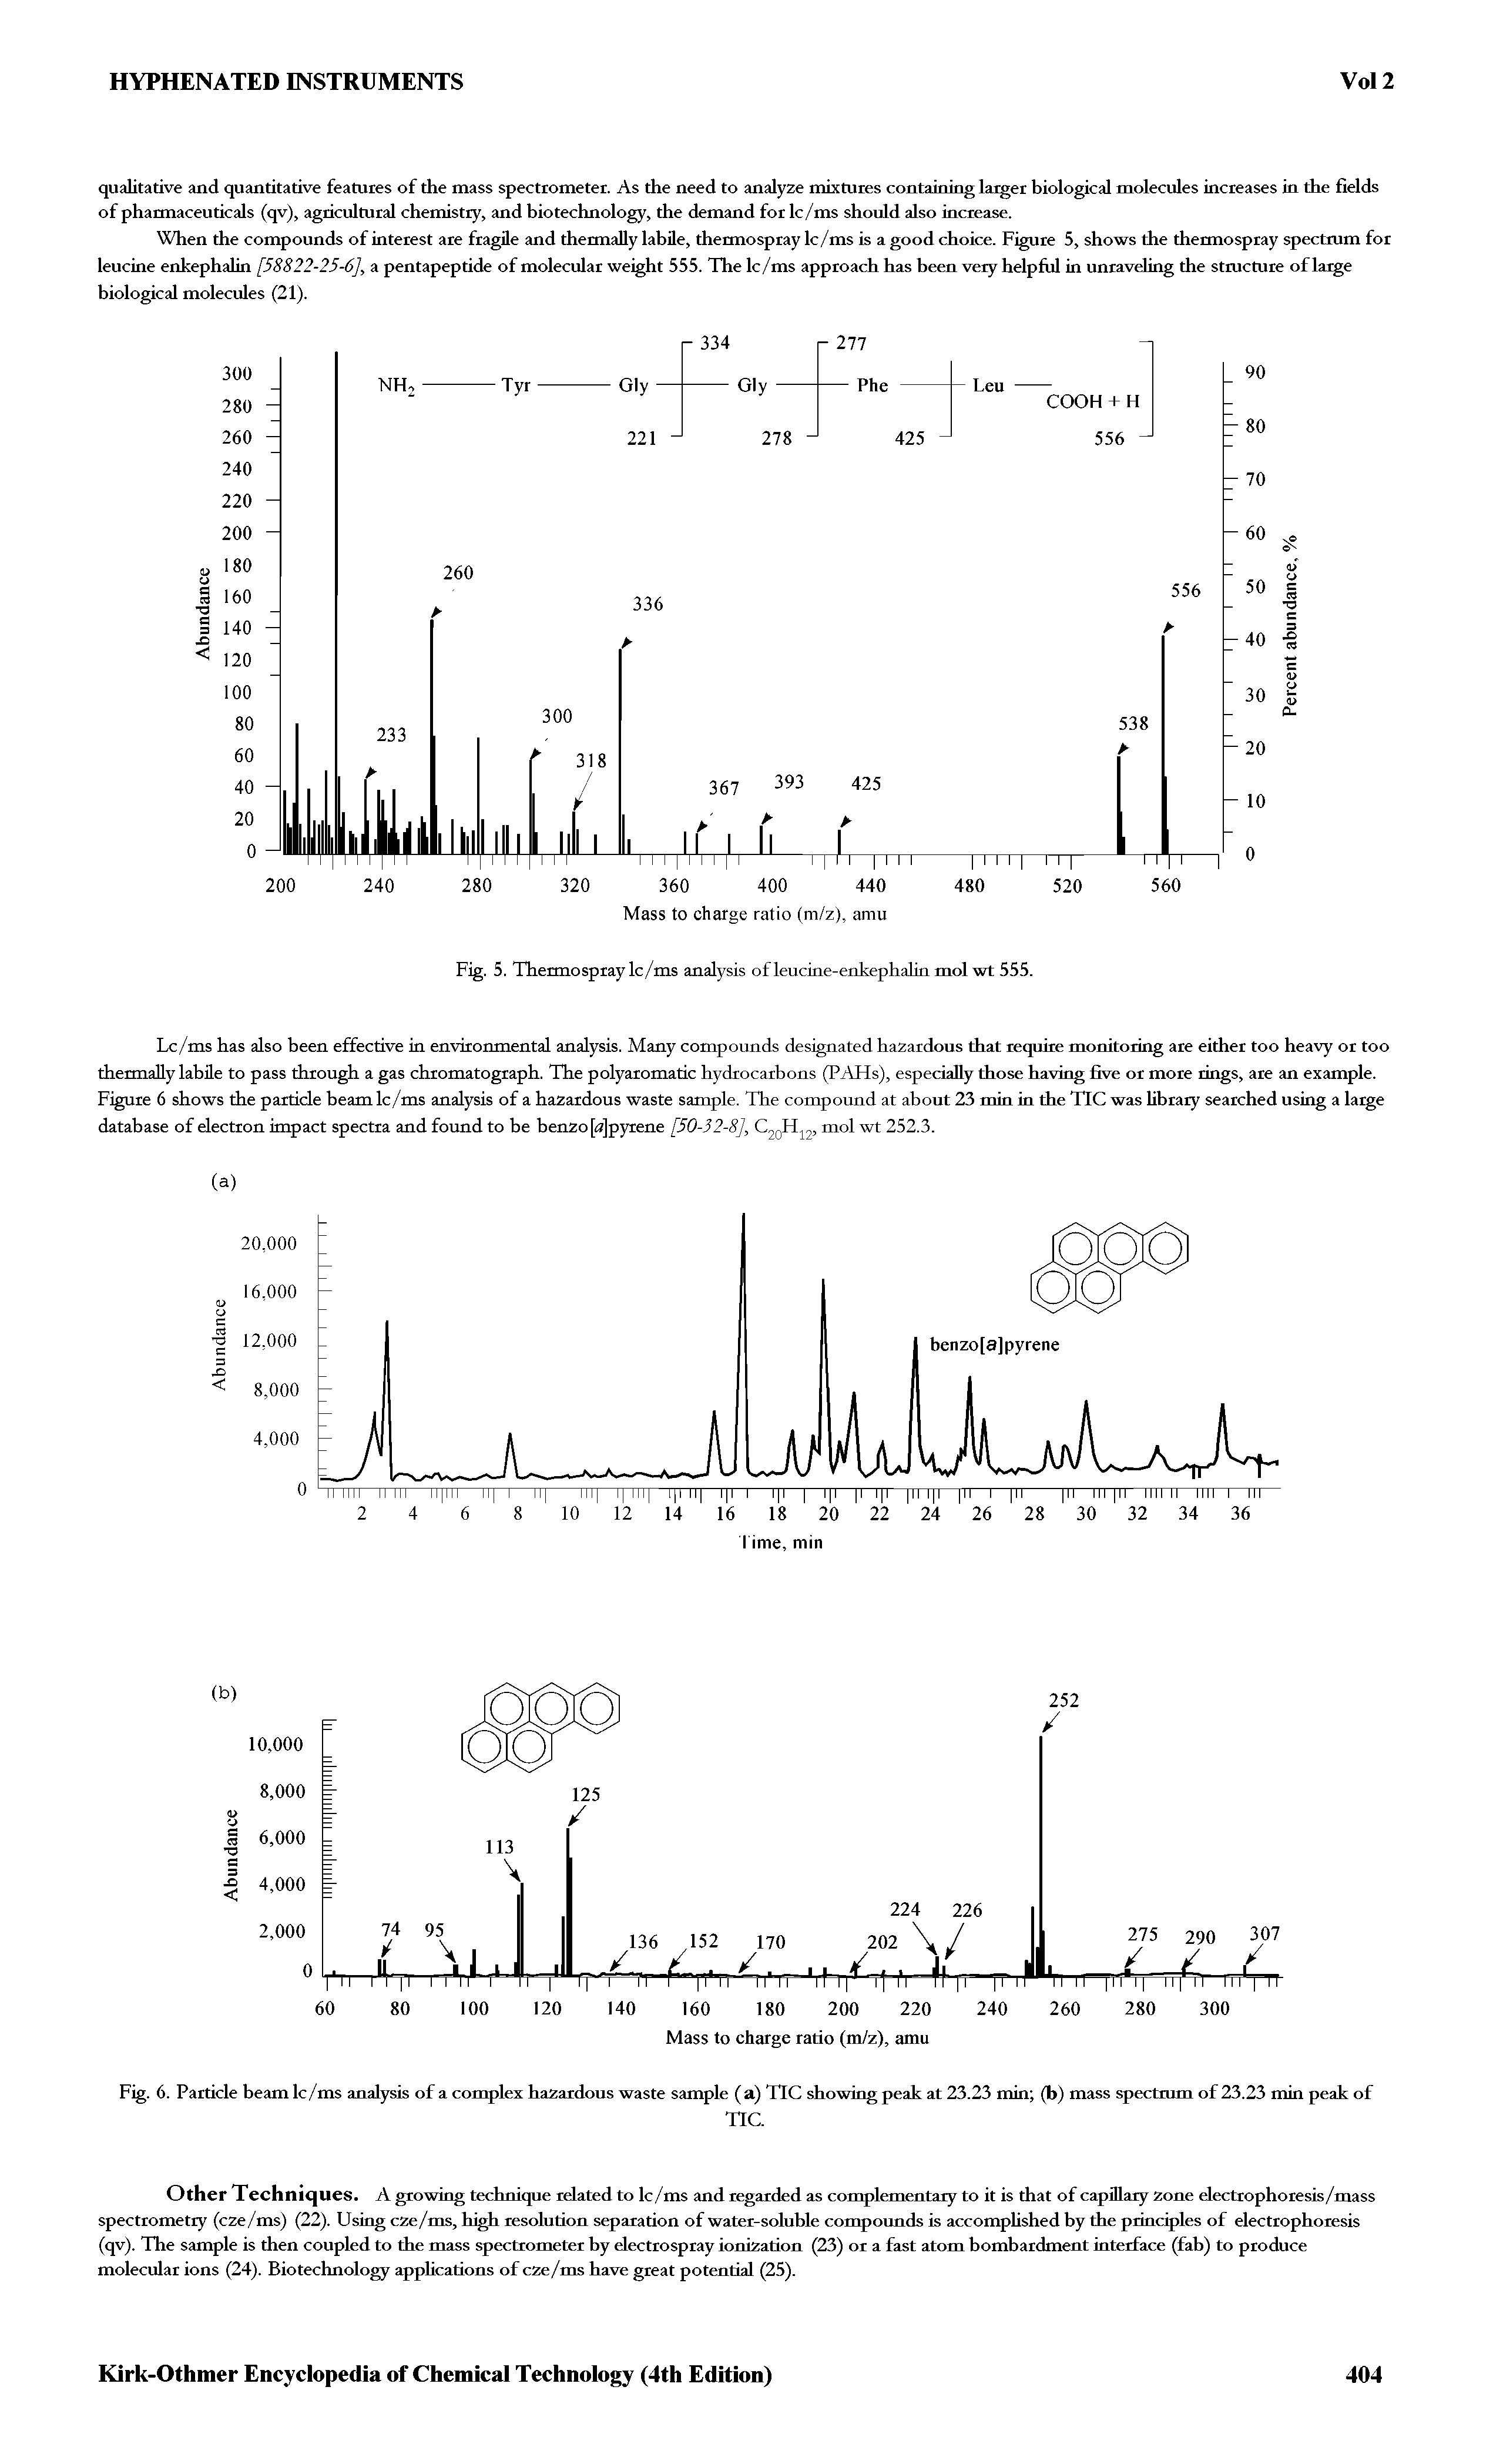 Fig. 6. Particle beam lc/ms analysis of a complex hazardous waste sample (a) TIC showing peak at 23.23 min (b) mass spectrum of 23.23 min peak of...